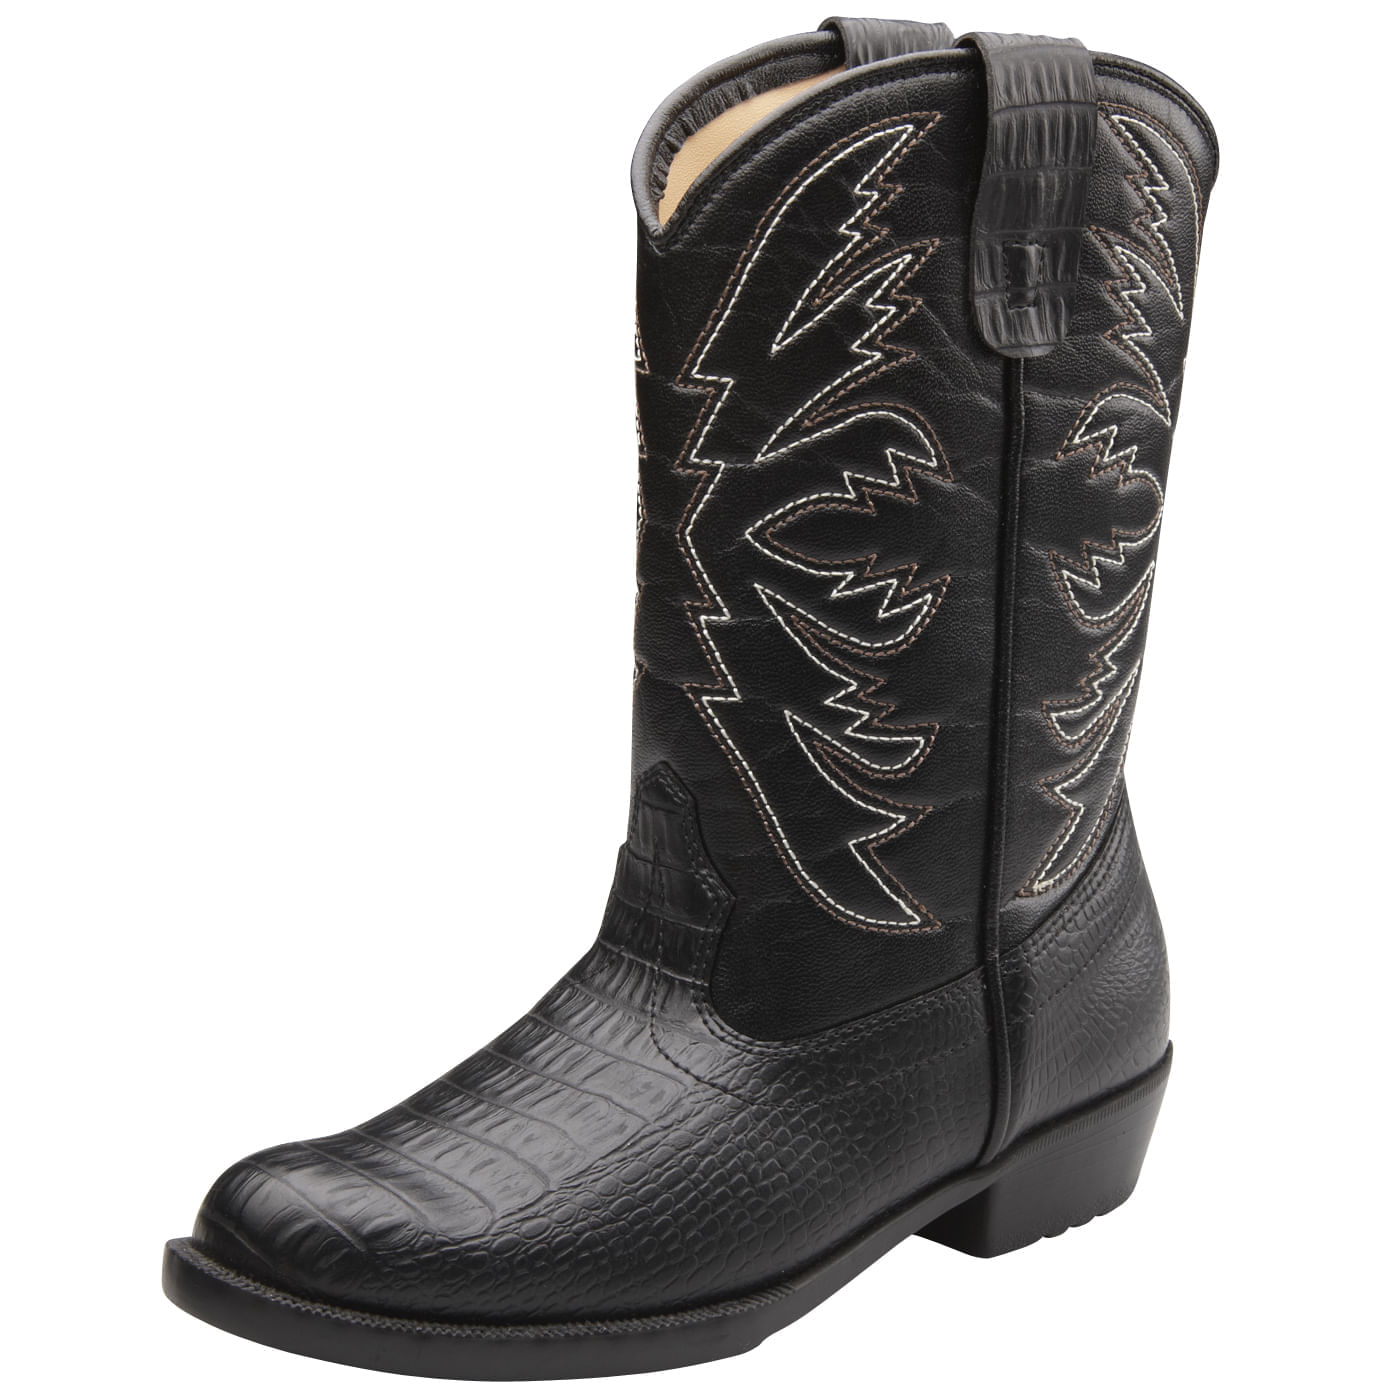 payless cowgirl boots